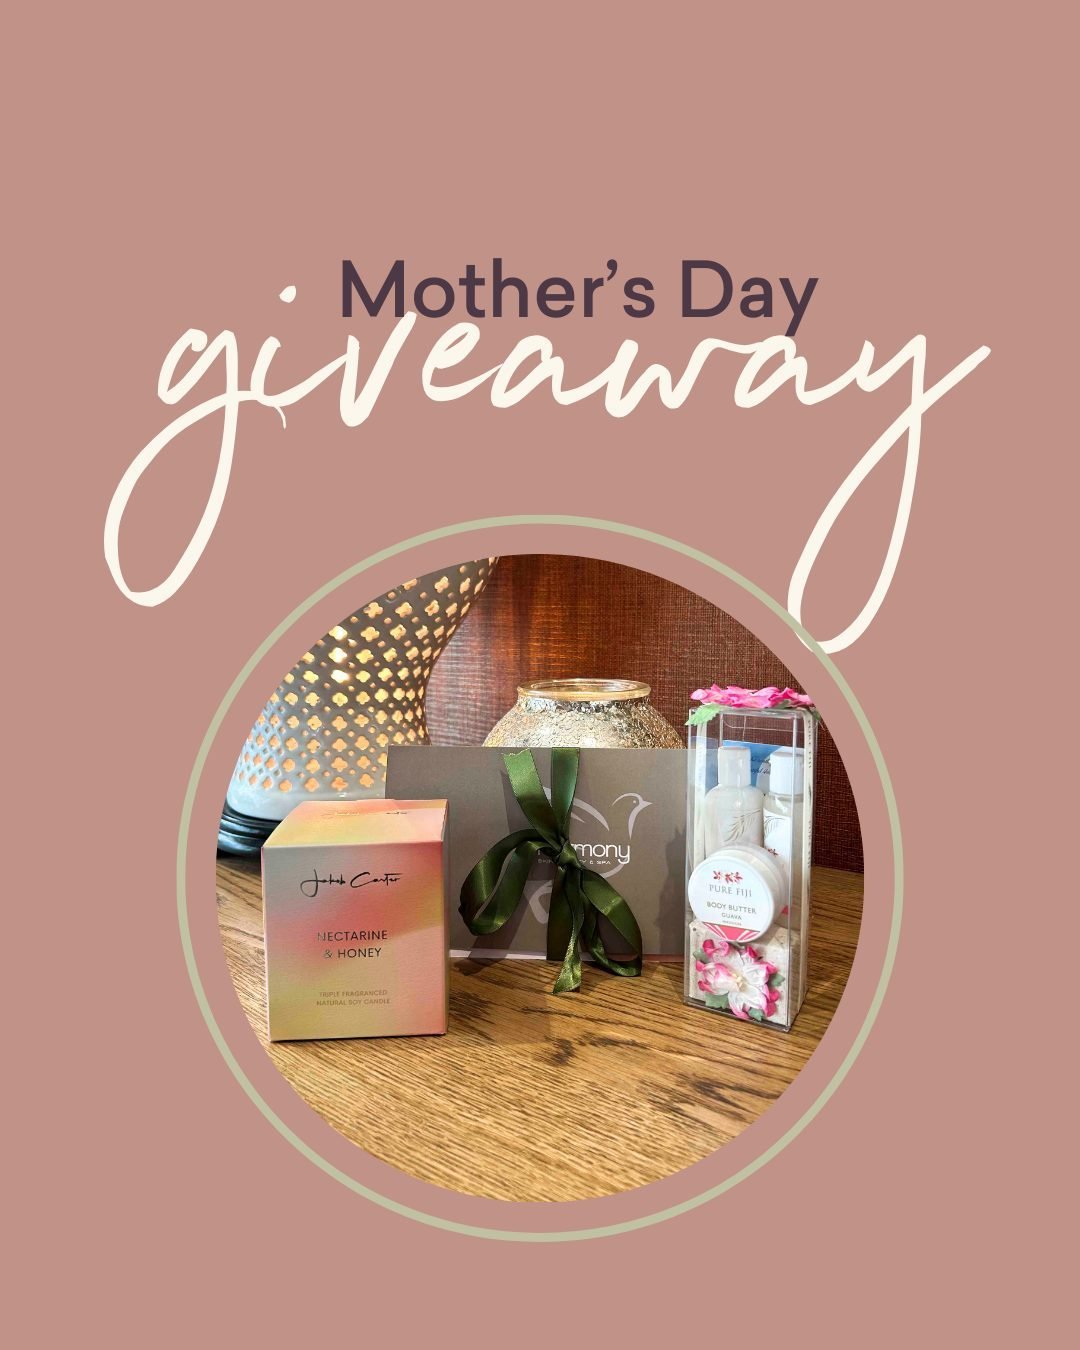 This Mother's Day, treat yourself or someone special to the ultimate pampering experience! ⁠
⁠
Enter for a chance to win our luxurious Mother&rsquo;s Day Pamper Package, including a relaxing facial, a 30-minute massage, and a manicure, plus the delig